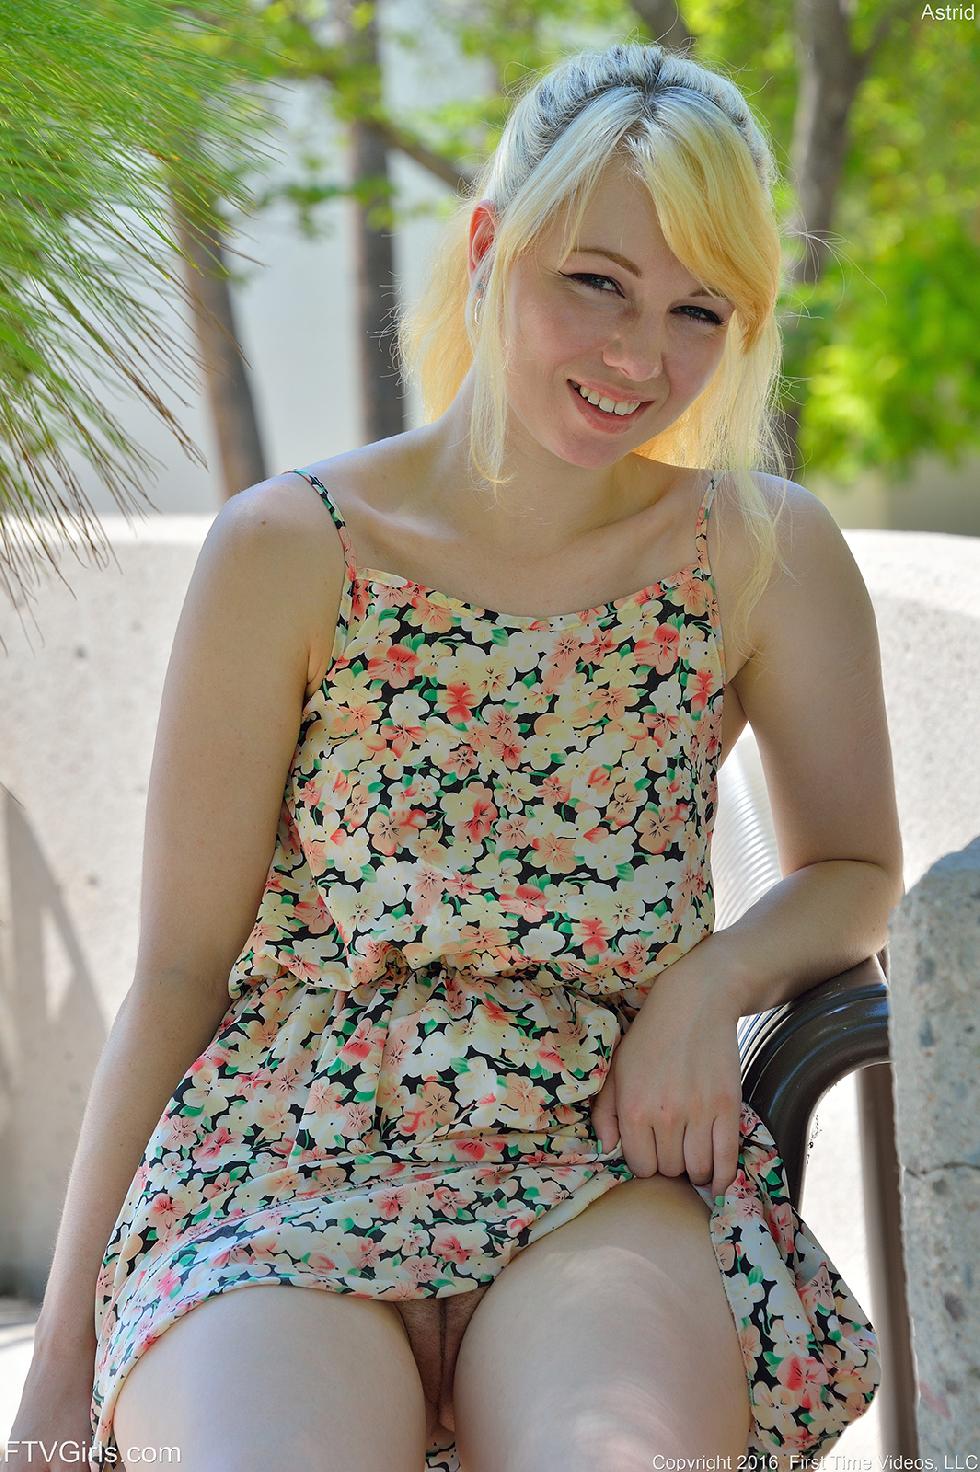 Blonde girl without panties - Astrid - 5